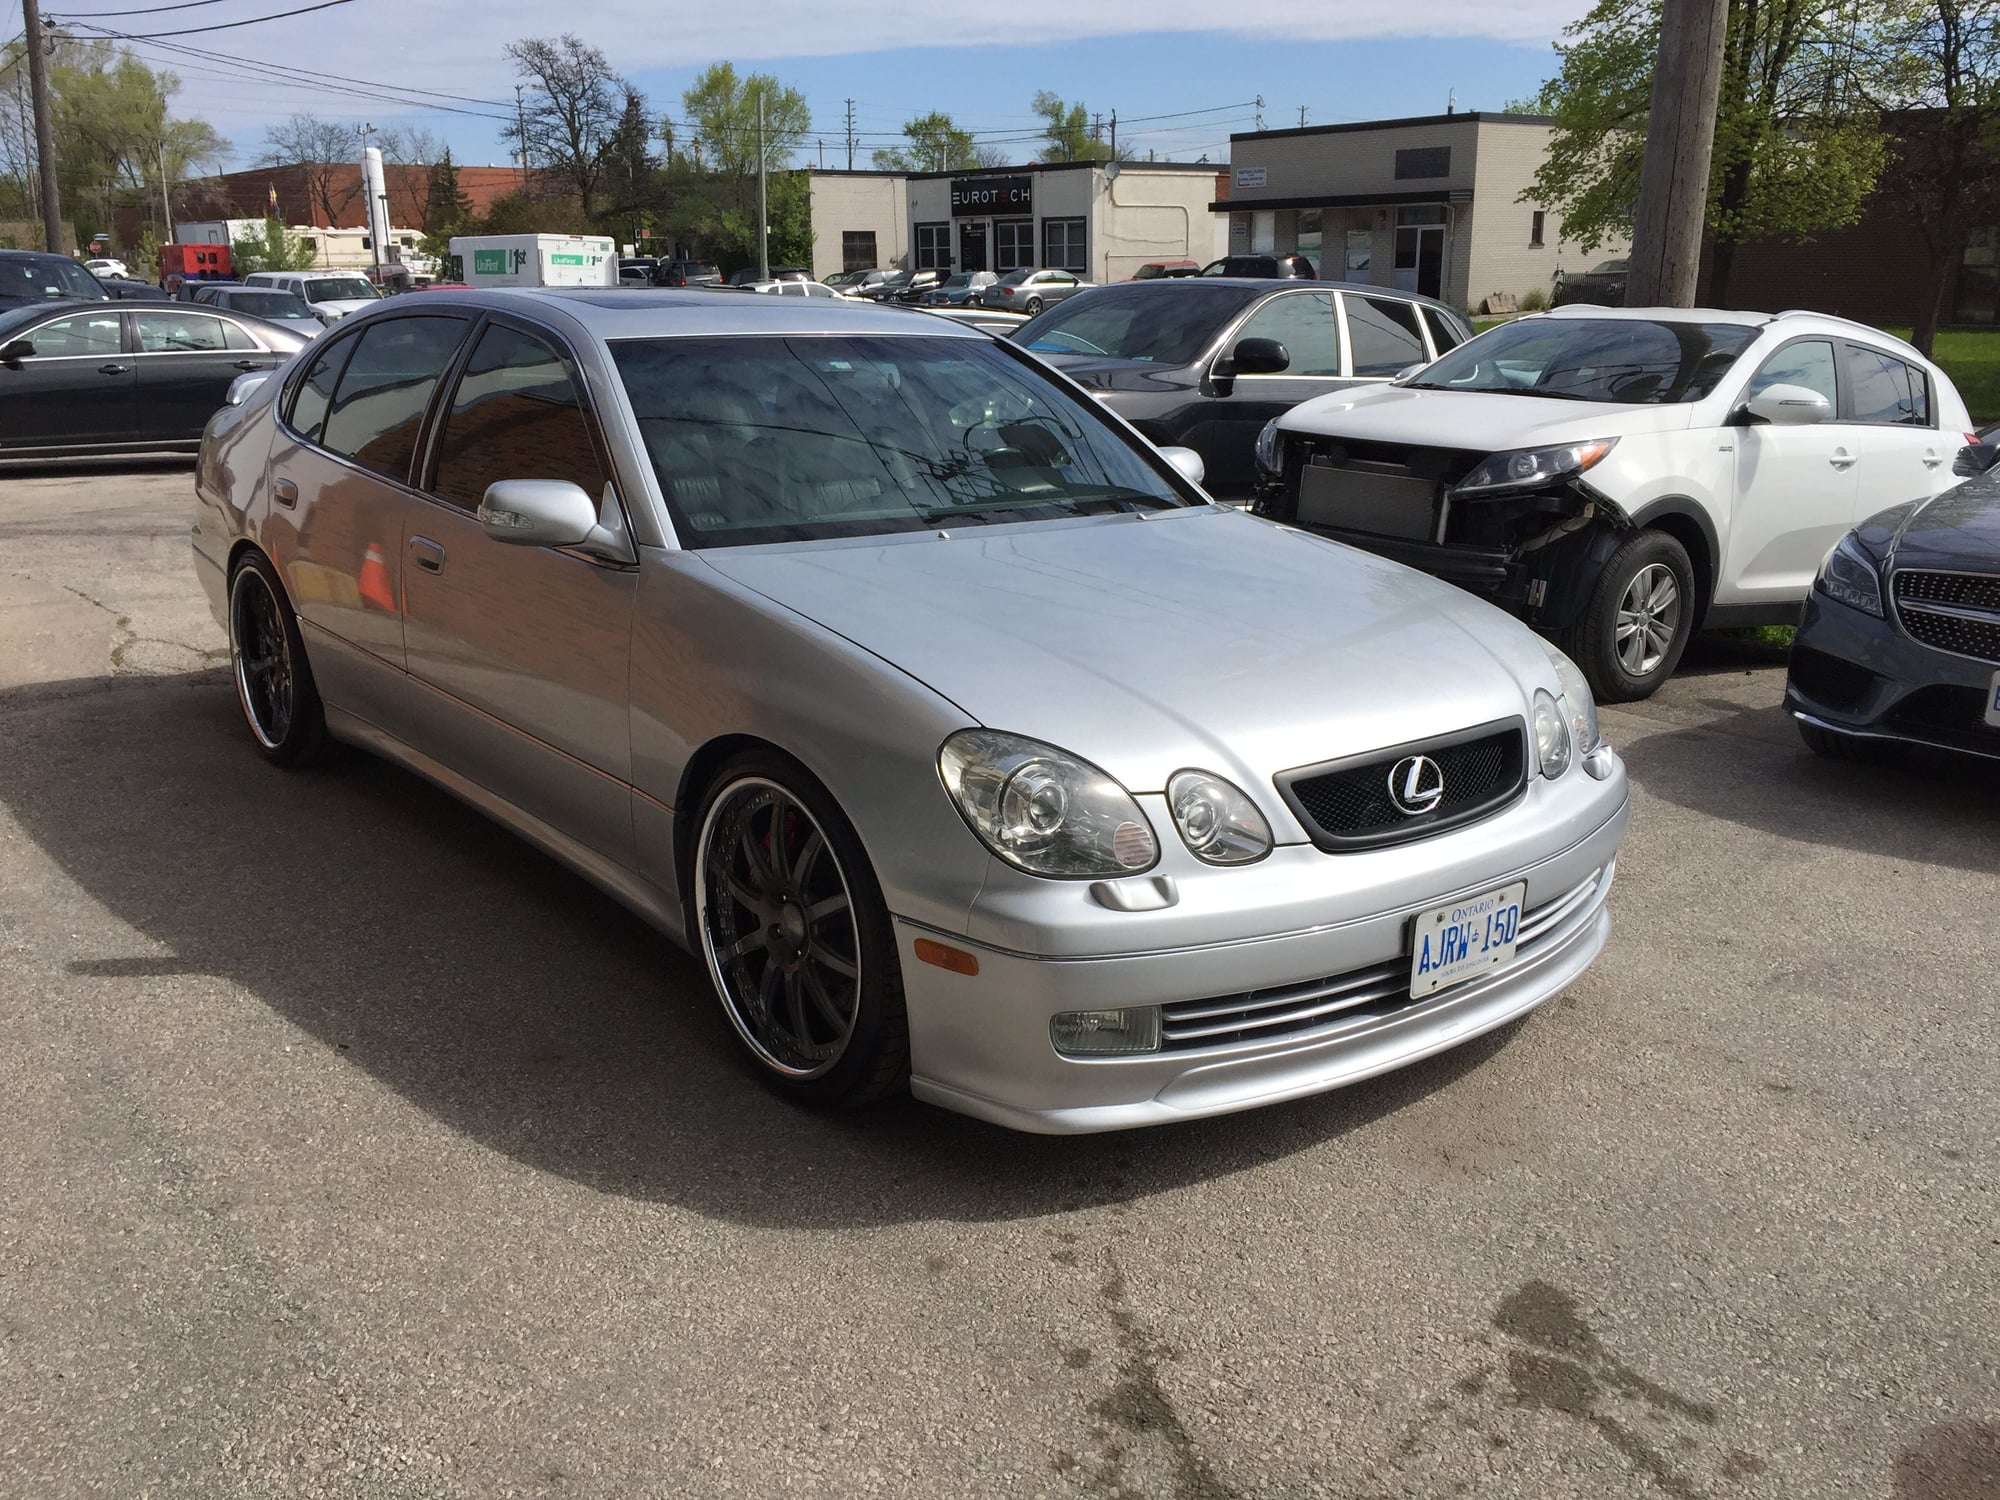 1999 Lexus GS400 - Mint condition 1999 Lexus GS400. I'm a die hard car enthusiast and bought it in 2002 - Used - VIN 5YJSA1E2XGF136895 - 97,000 Miles - 8 cyl - 2WD - Automatic - Sedan - Silver - Oakville, ON L6L6T9, Canada